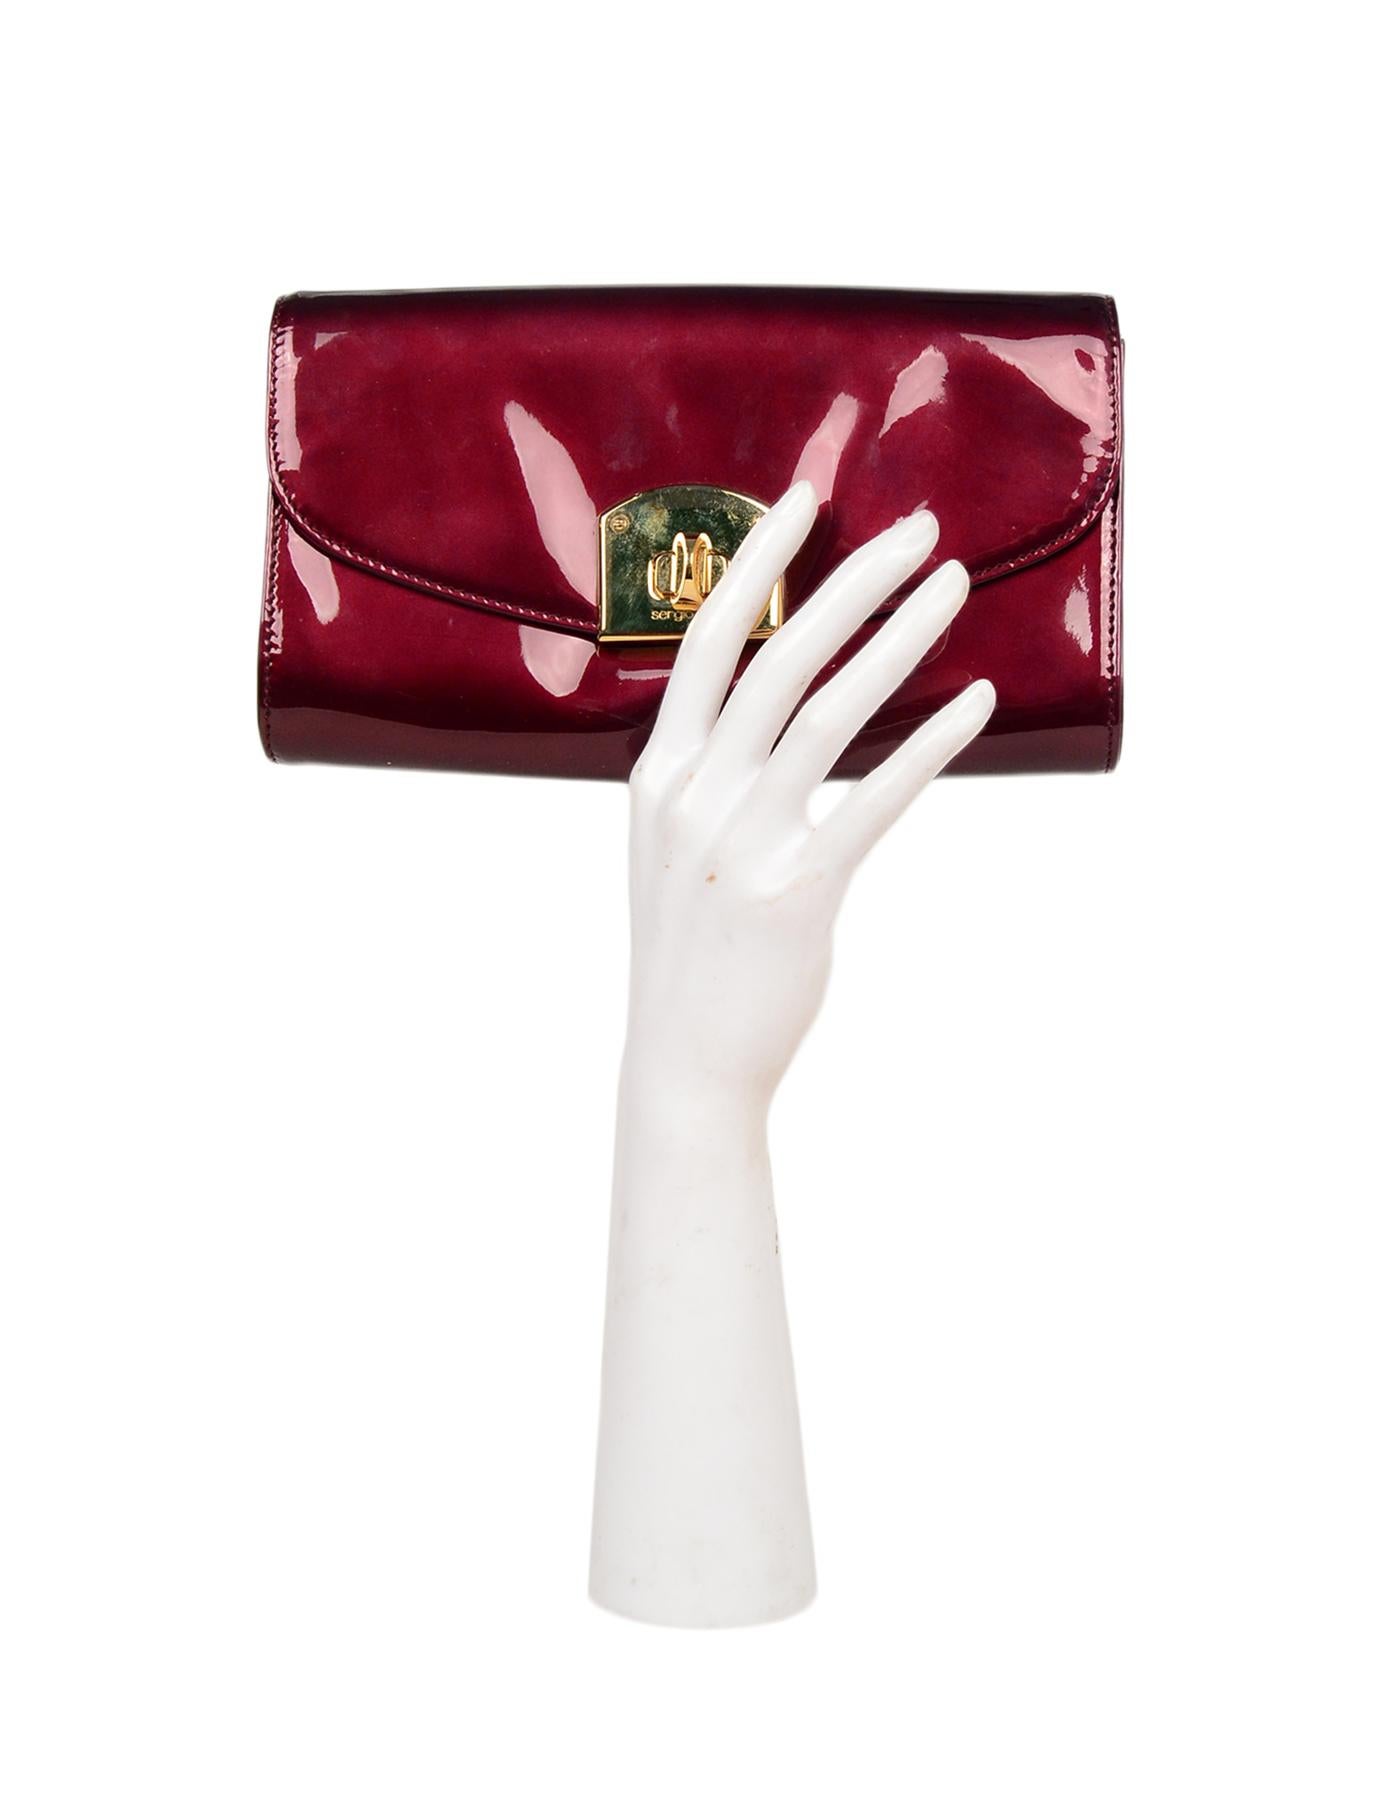 Sergio Rossi Burgundy Patent Leather Clutch W/ Wrist Strap

Made In: Italy
Color: Burgundy, gold
Hardware: Goldtone
Materials: Patent leather, metal
Lining: Tan leather
Closure/Opening: Flap top with twistlock closure 
Exterior Pockets: